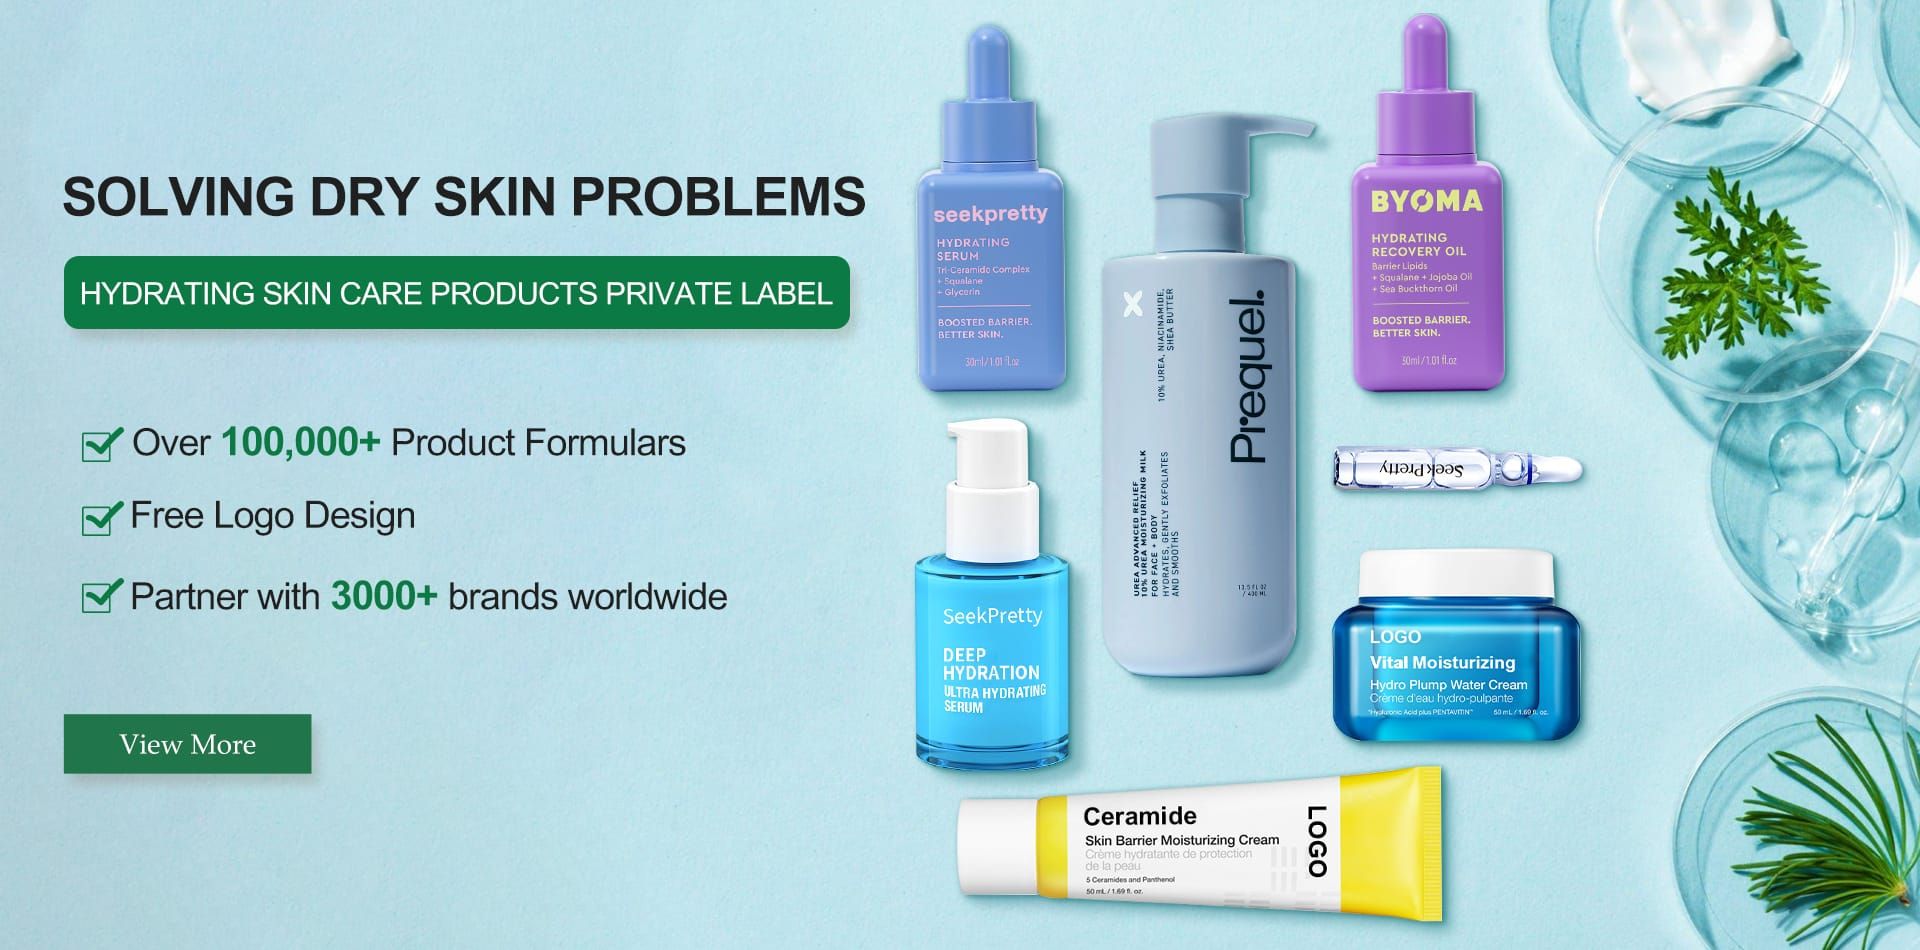 HYDRATING SKIN CARE PRODUCTS PRIVATE LABEL